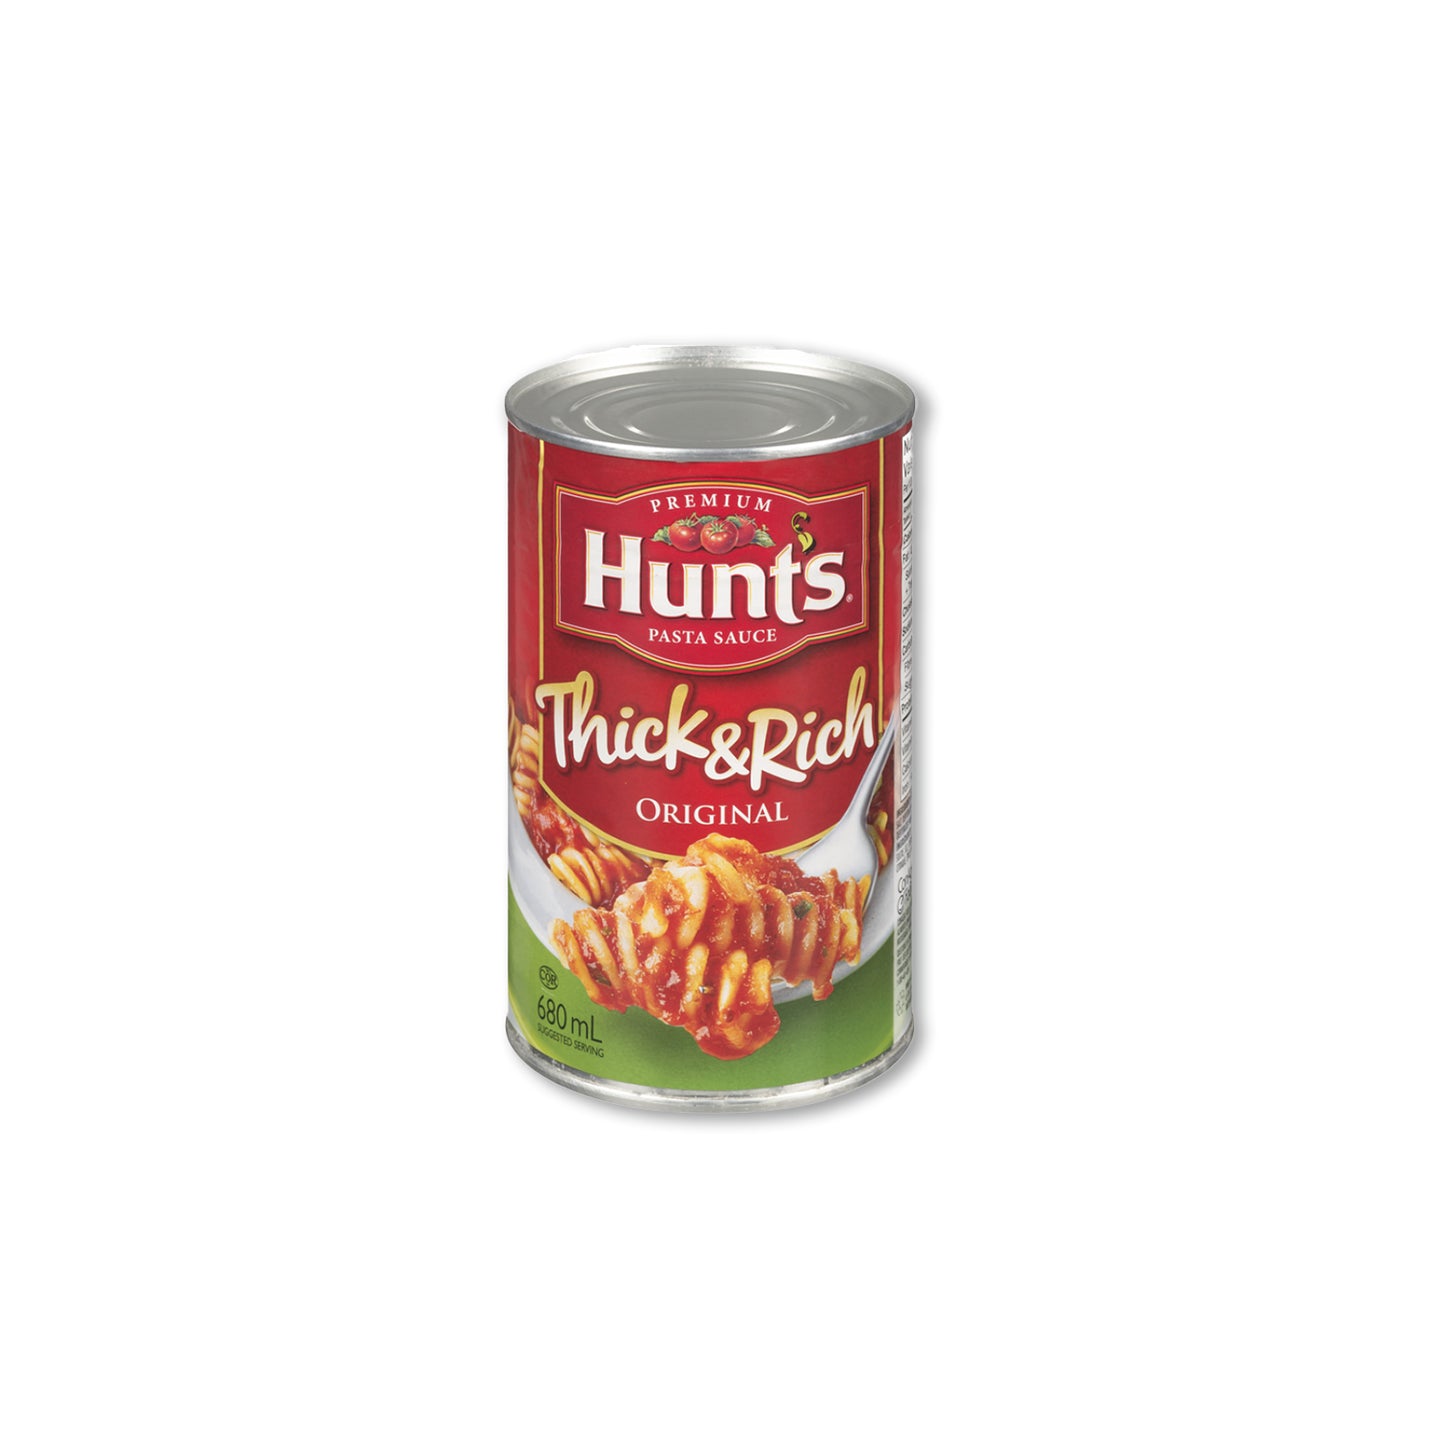 Hunt's Thick and Rich Pasta Sauce (Original)